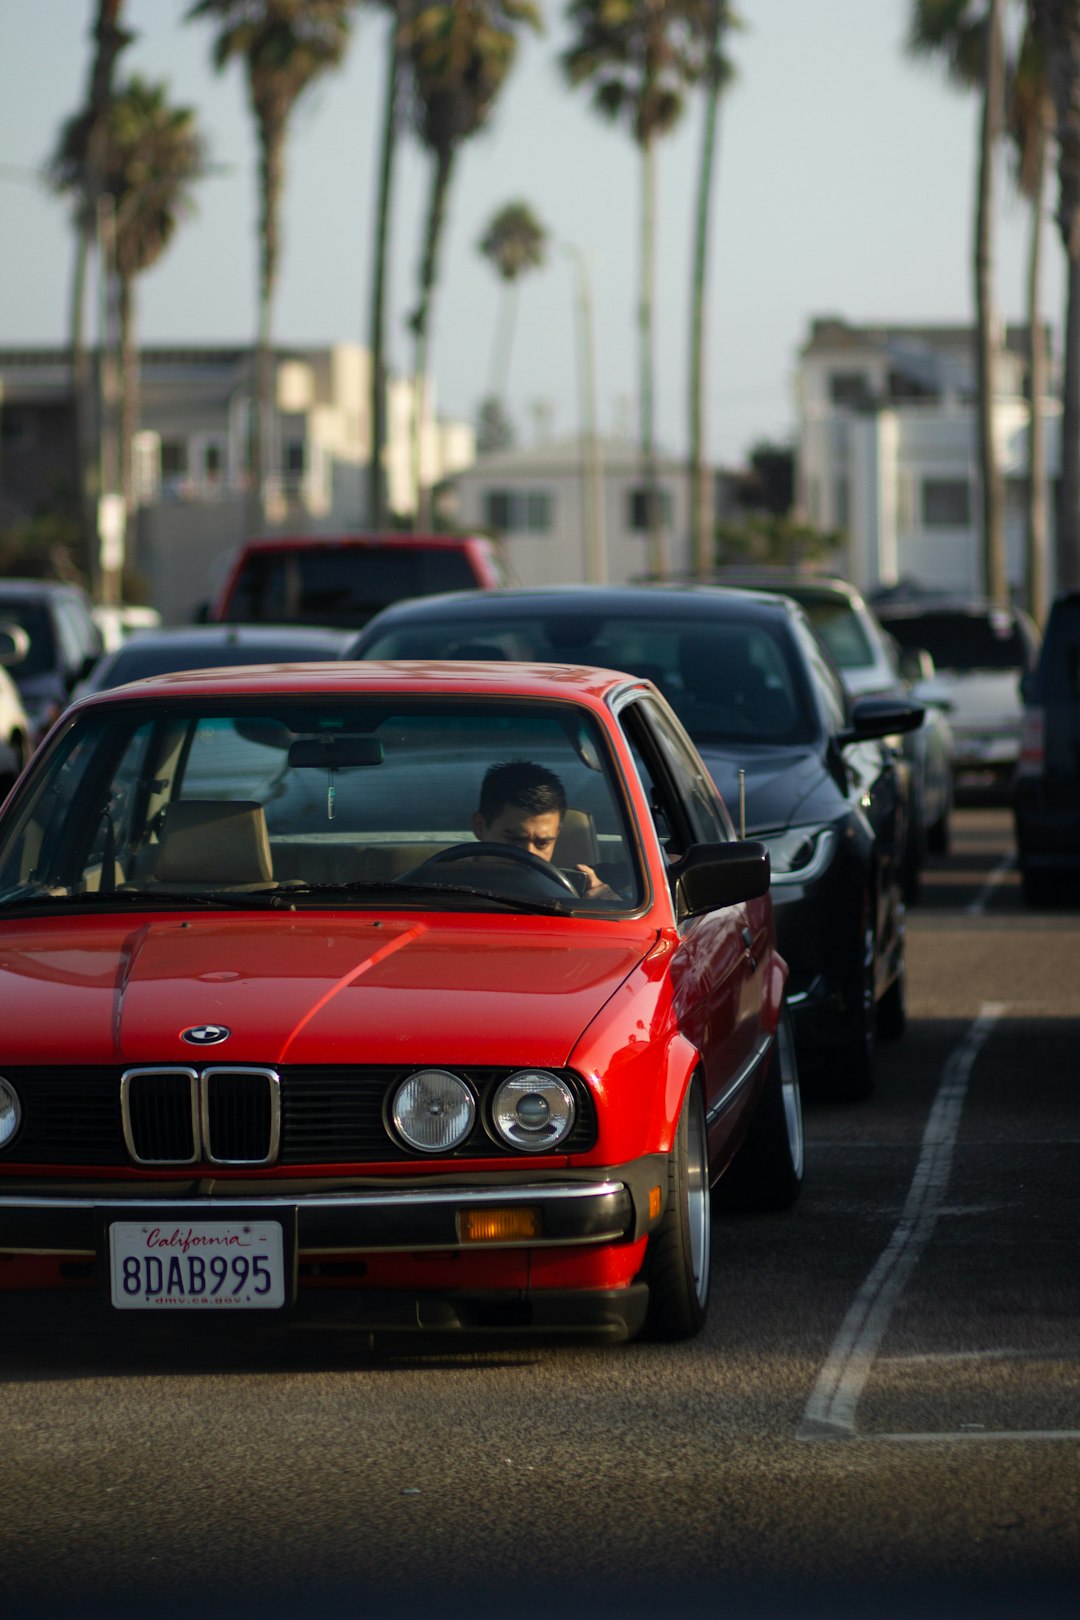 red bmw m 3 parked on parking lot during daytime